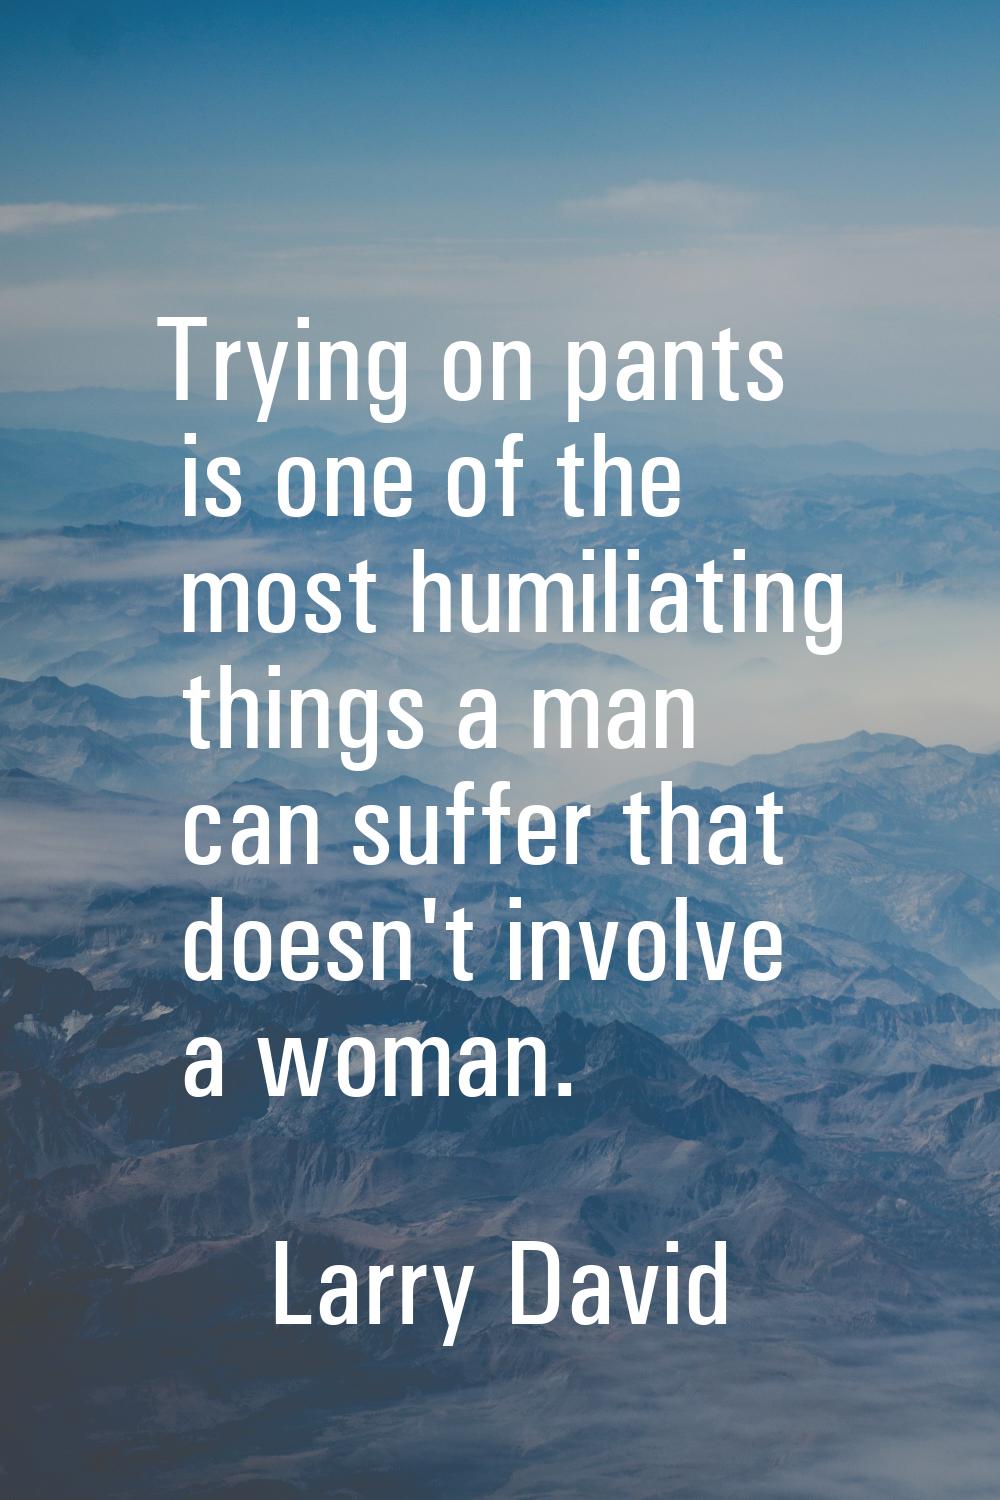 Trying on pants is one of the most humiliating things a man can suffer that doesn't involve a woman